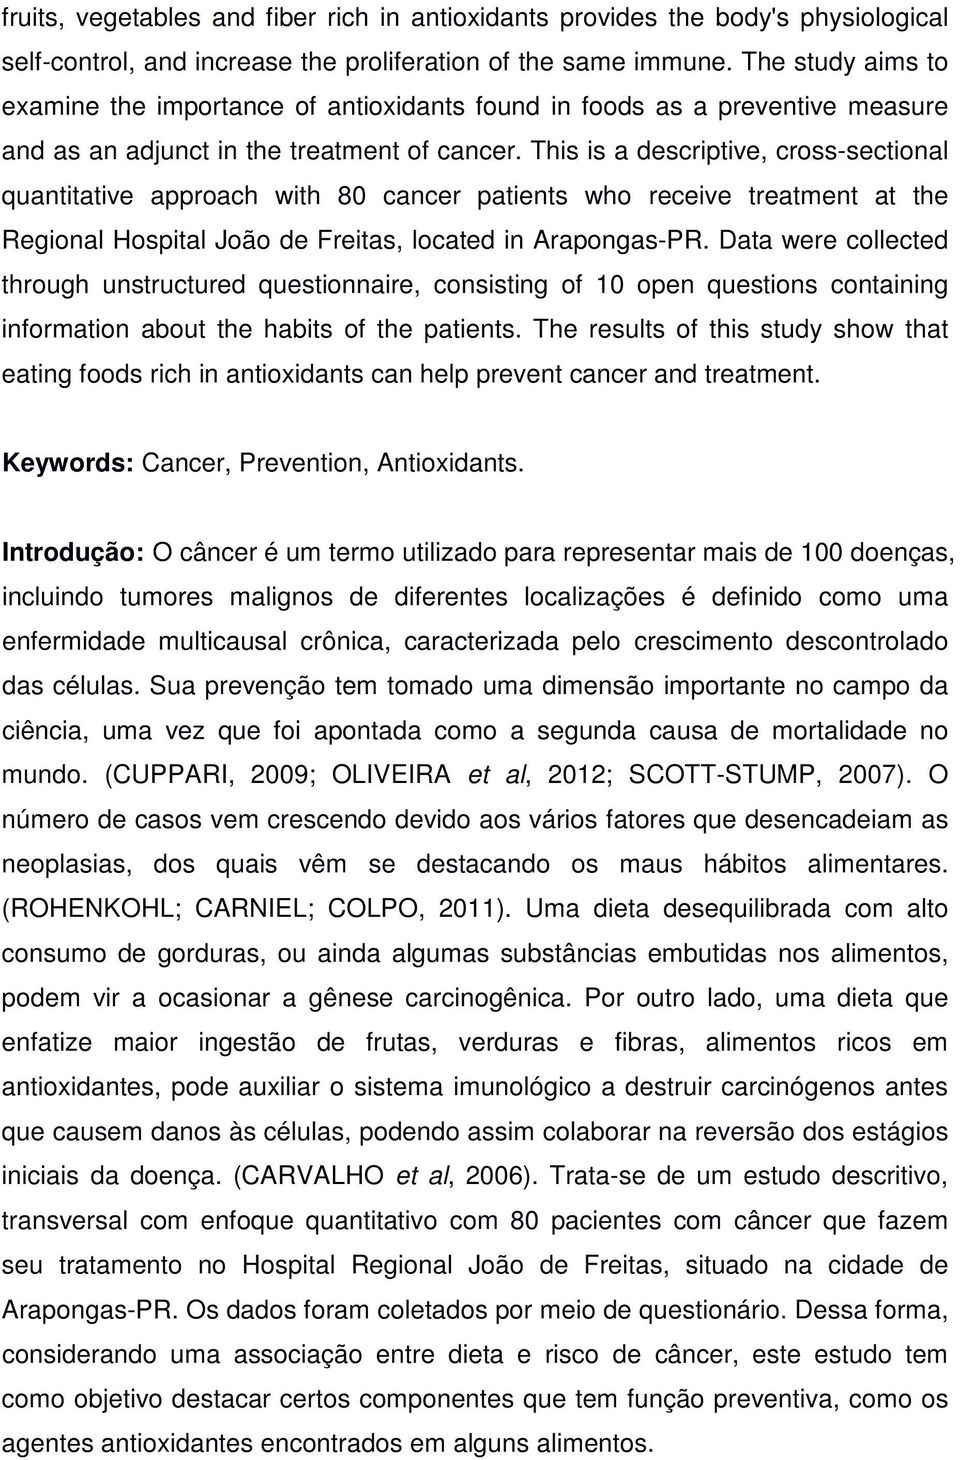 This is a descriptive, cross-sectional quantitative approach with 80 cancer patients who receive treatment at the Regional Hospital João de Freitas, located in Arapongas-PR.